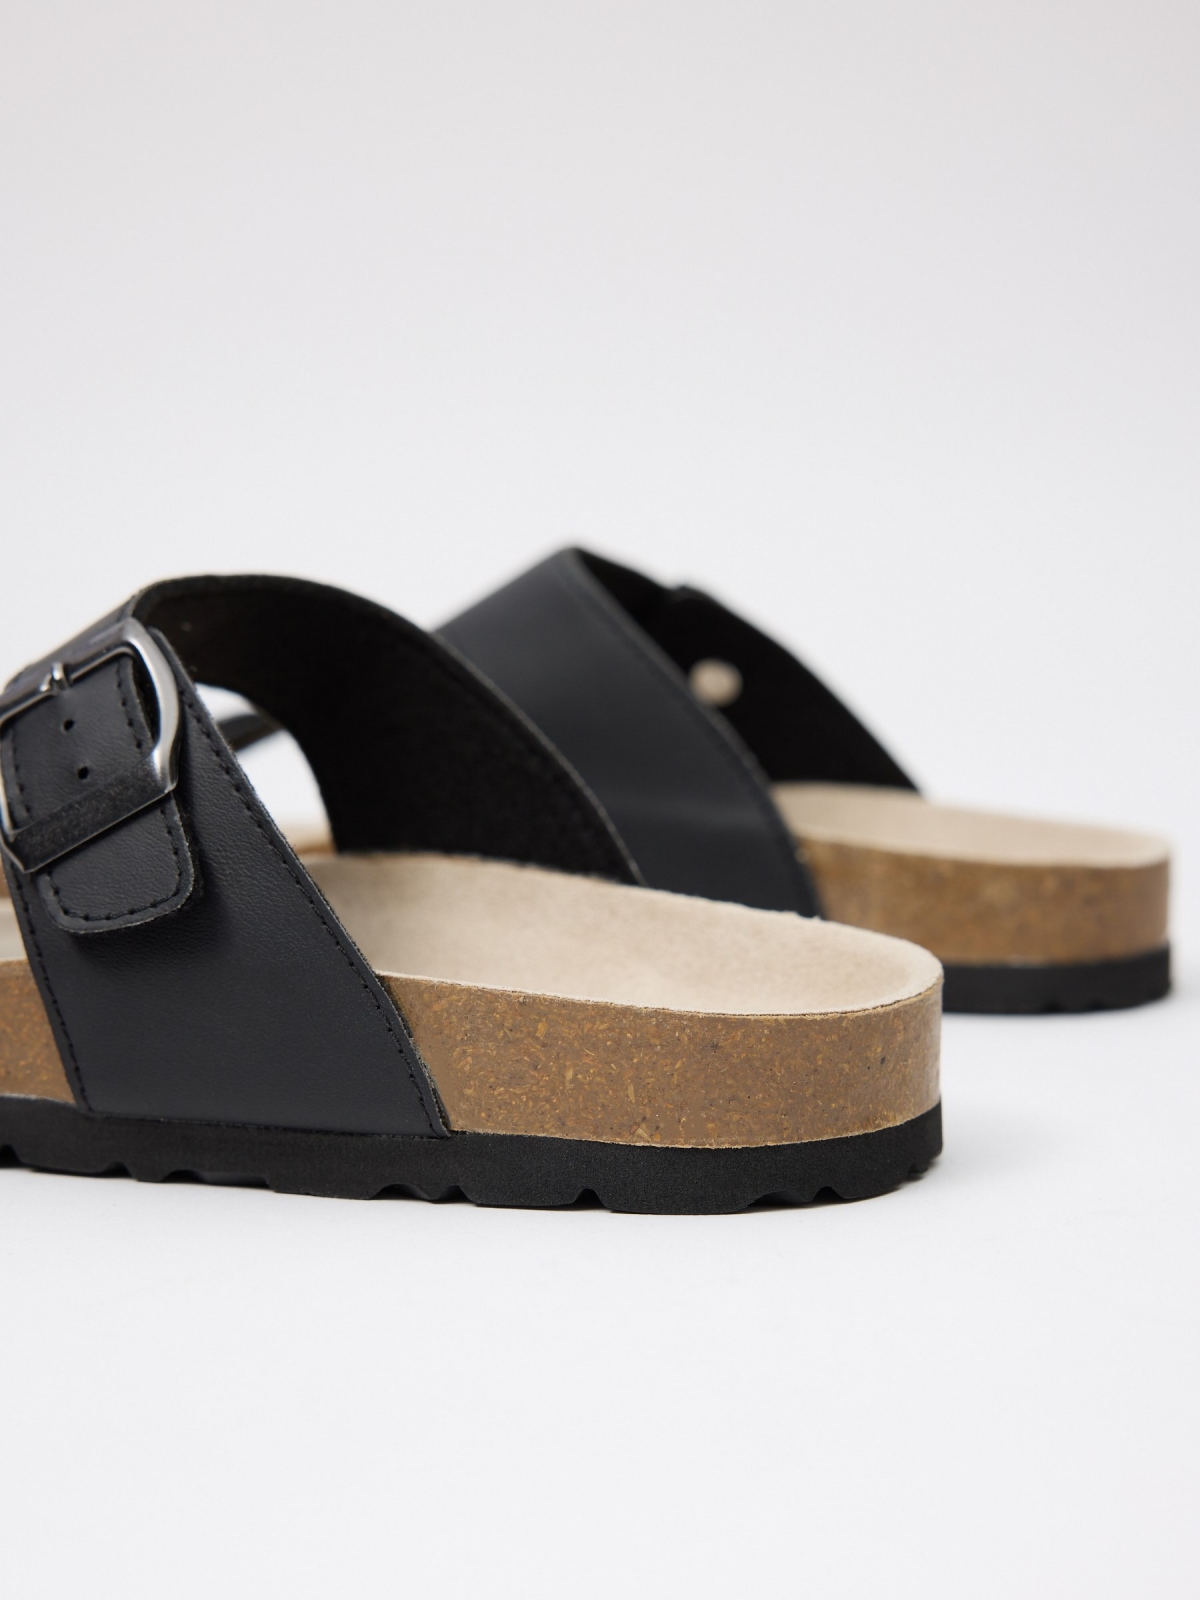 Black sandal with buckle black detail view